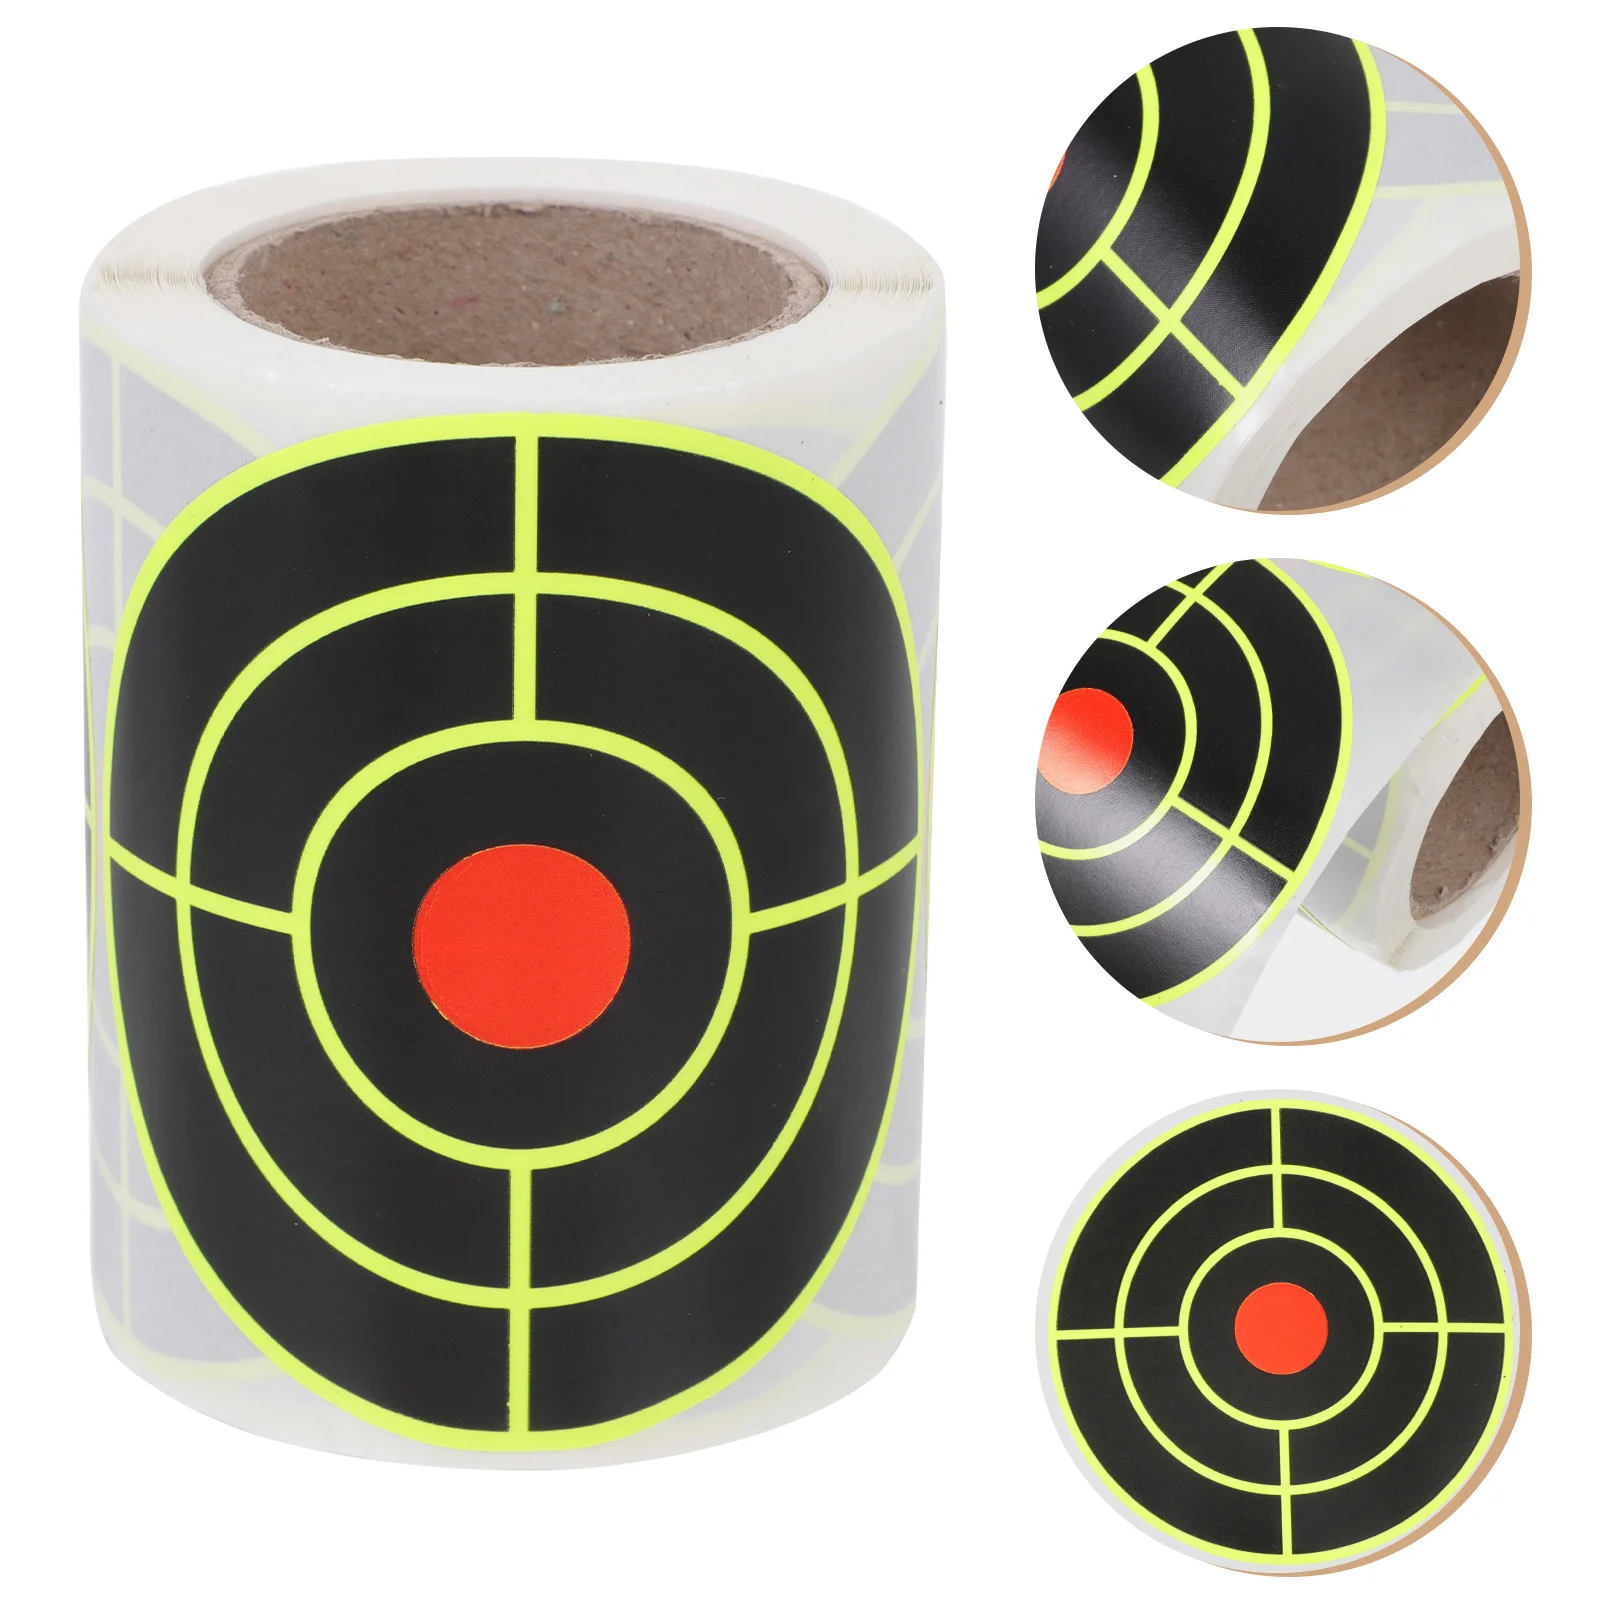 

200Pcs Splatter Stickers Roll Fluorescent Self- Adhesive Stickers Papers for Archery Bow Practice Training